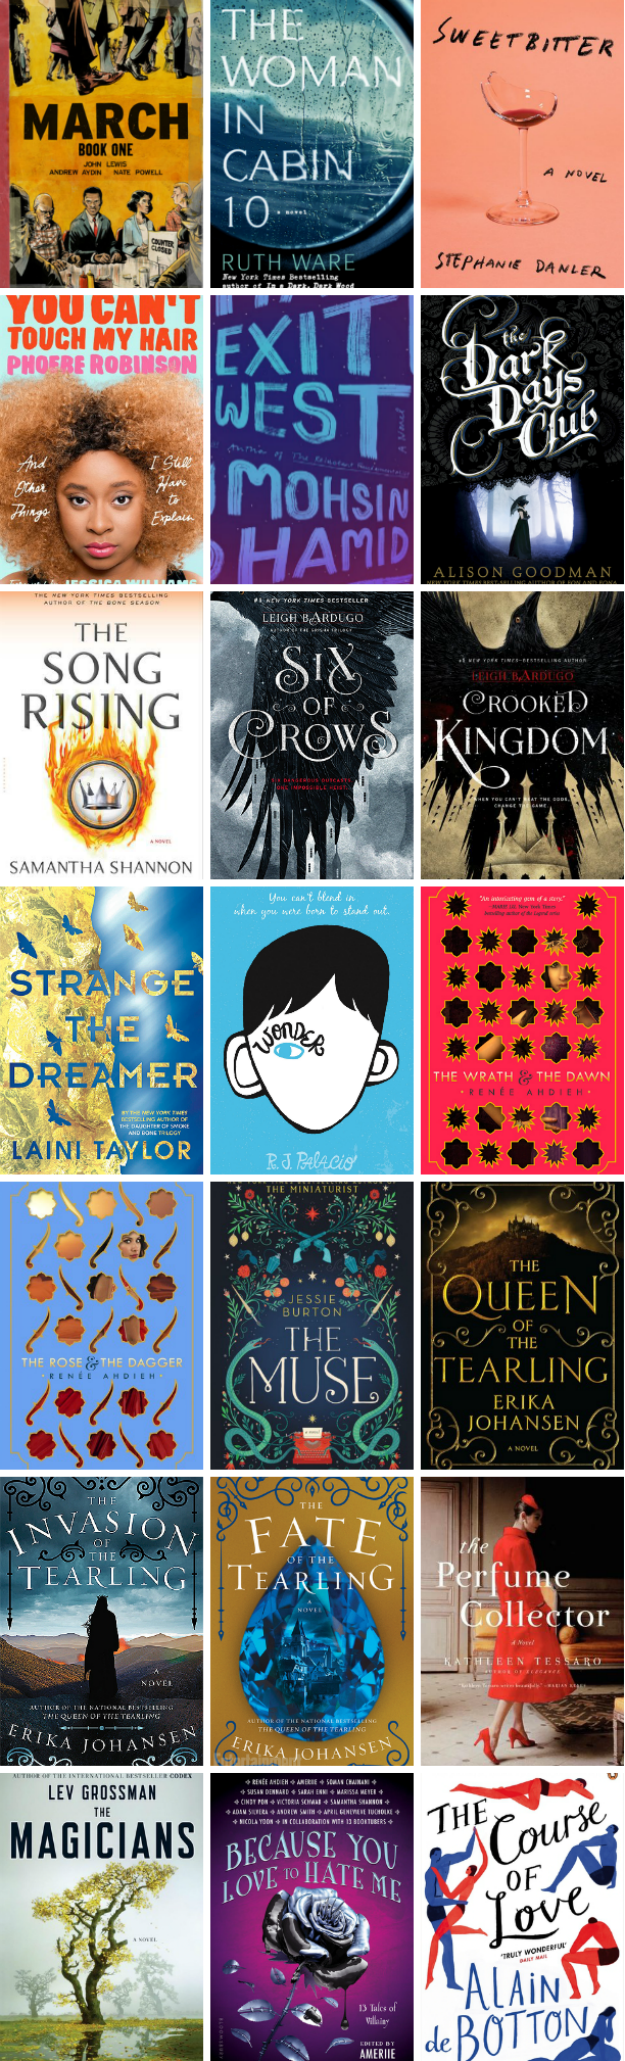  july reads, summer reads, wonder book review, the course of love review, six of crows review, sweetbitter review, because you love to hate me review, exit west review